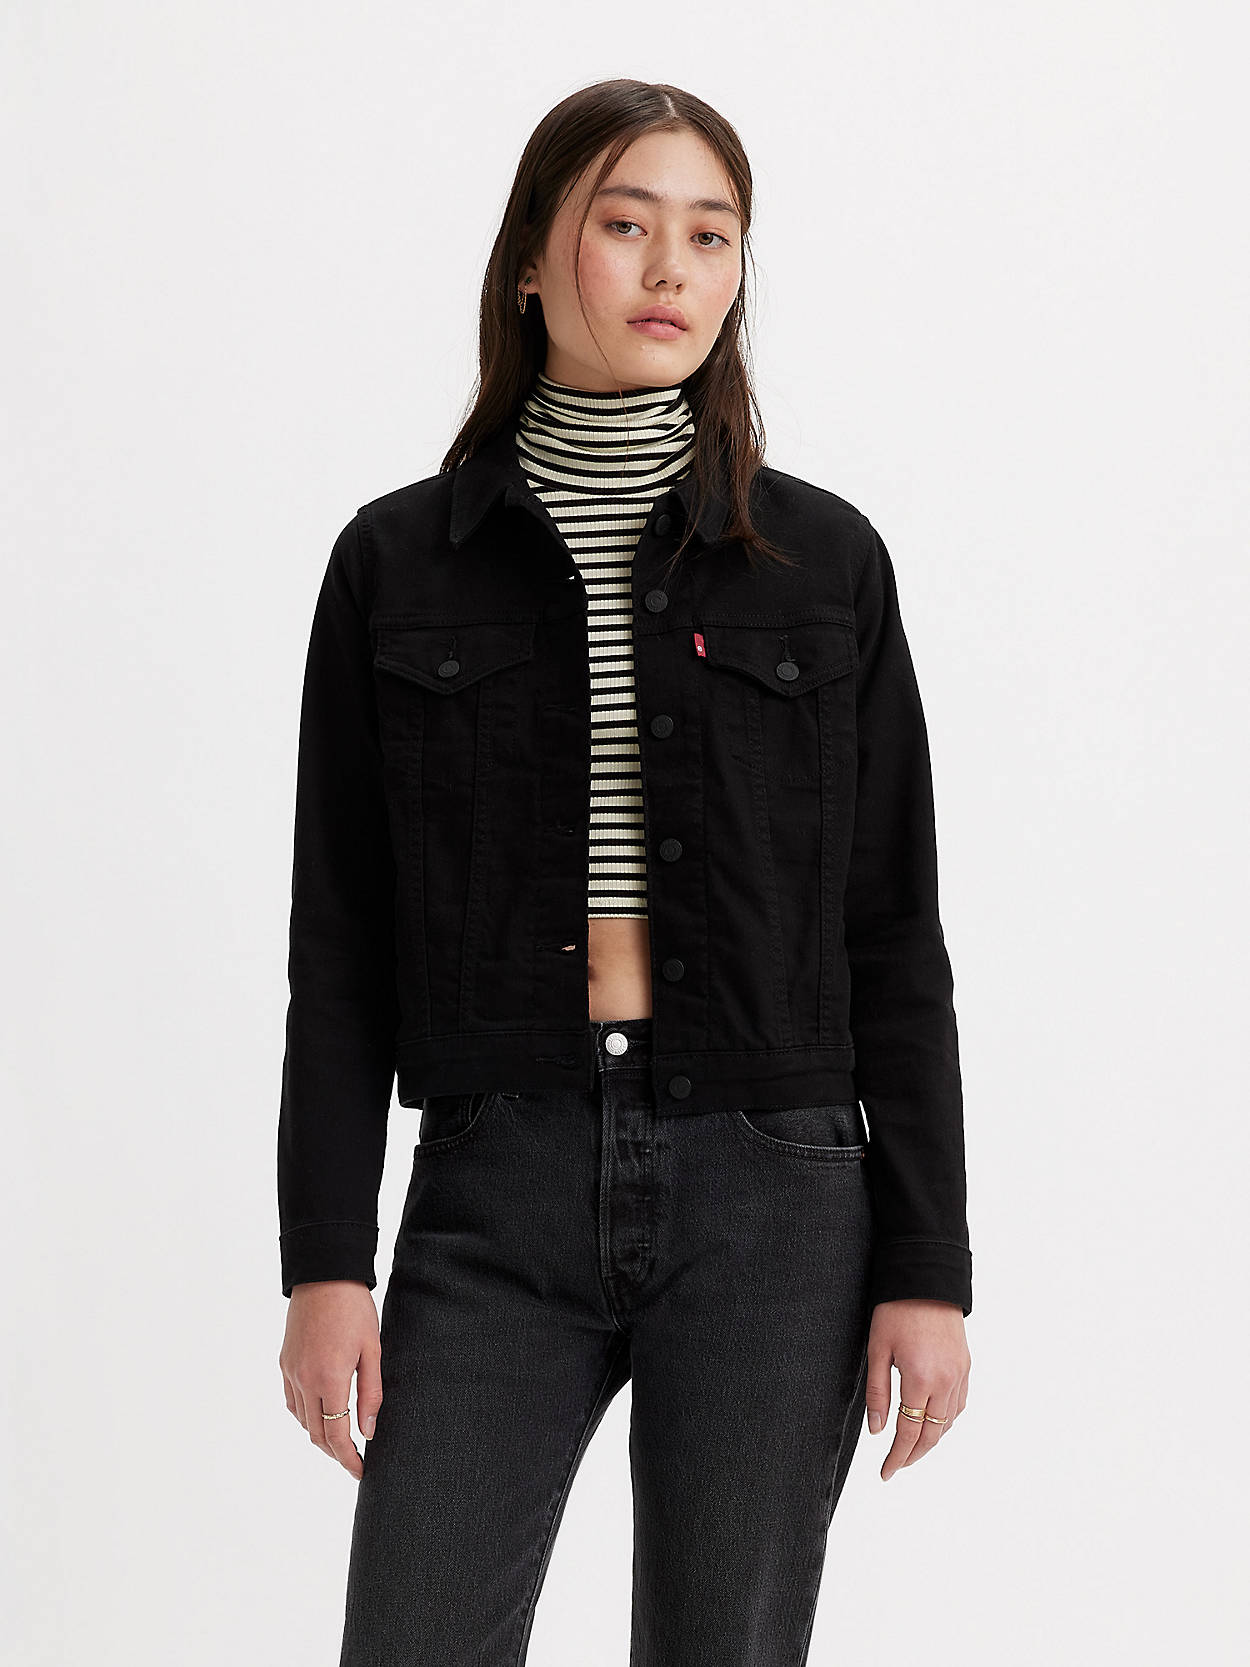 Levi’s: 40% off plus free shipping and return